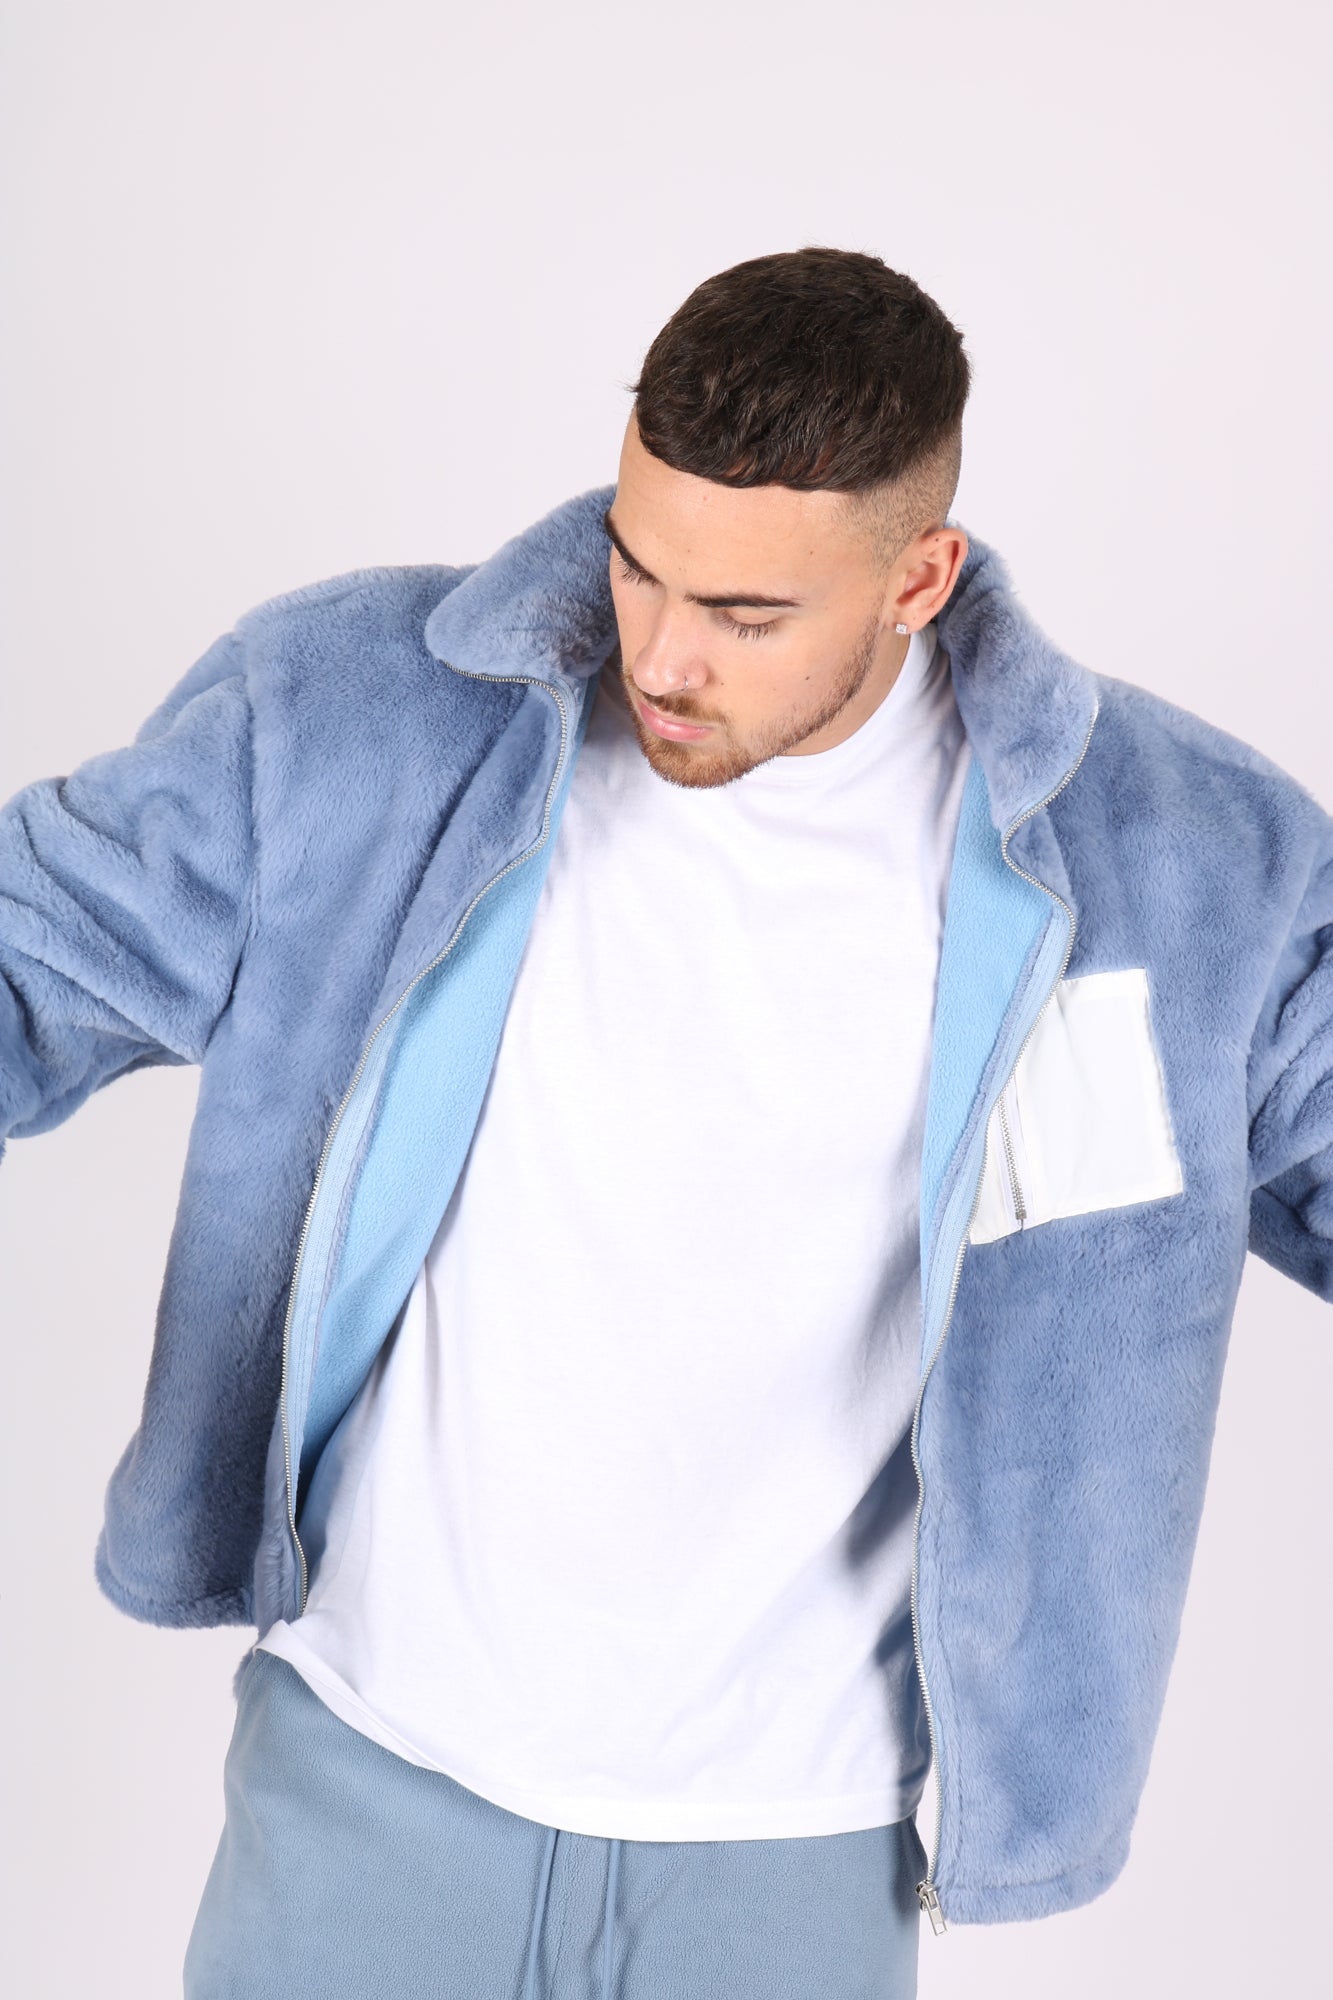 Utility Fur Jacket In Baby Blue With White Nylon Pockets